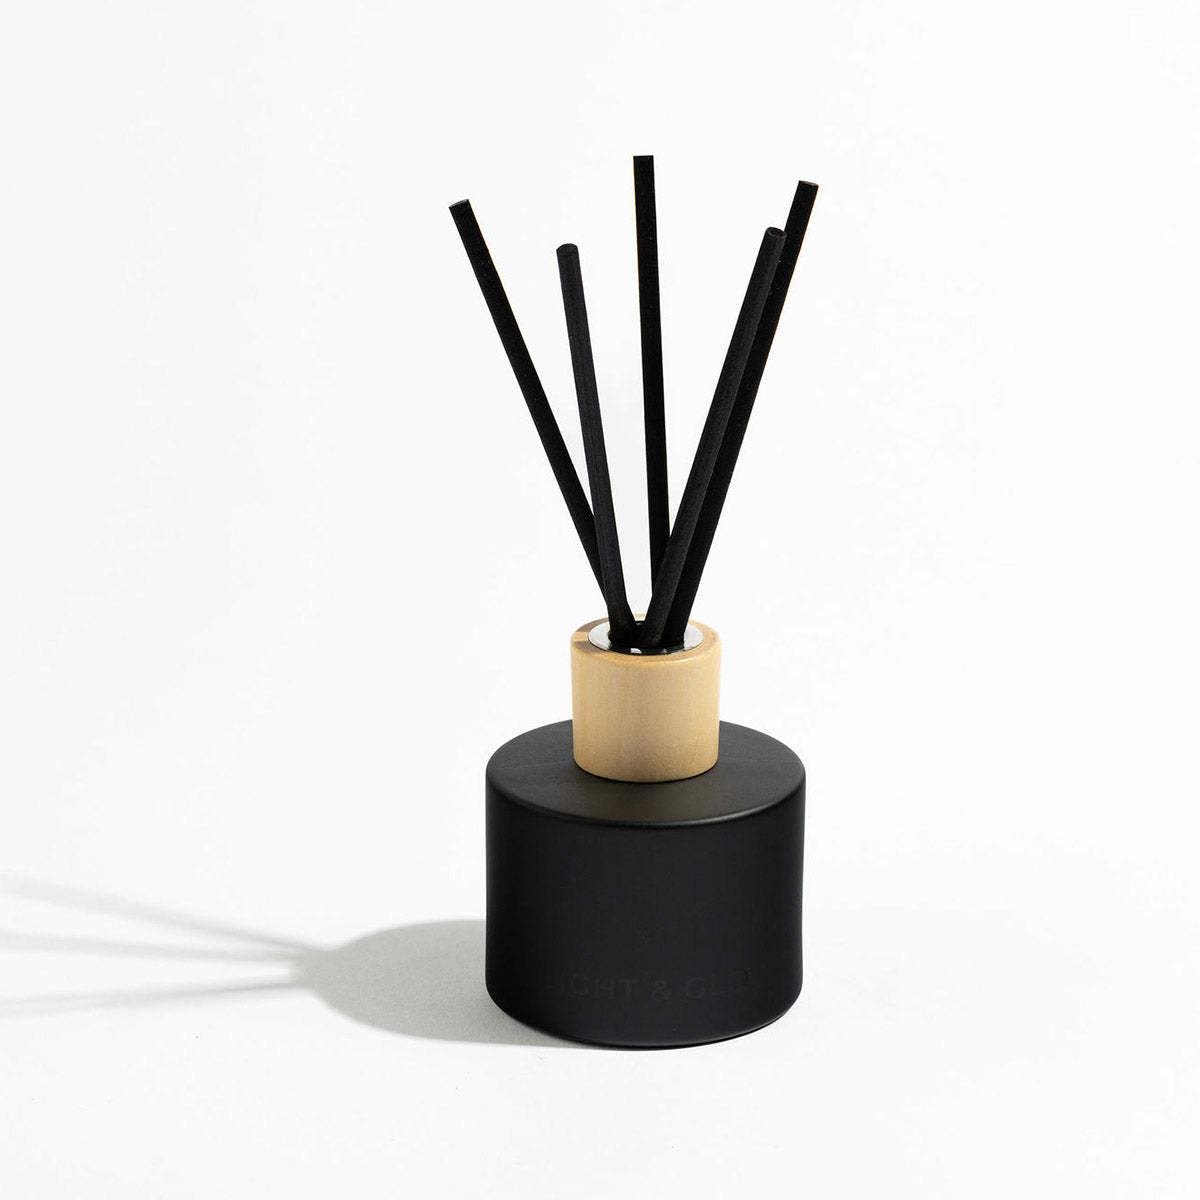 Vanilla Caramel - Monochrome Scent Diffuser | Luxury Candles &amp; Home Fragrances by Light + Glo